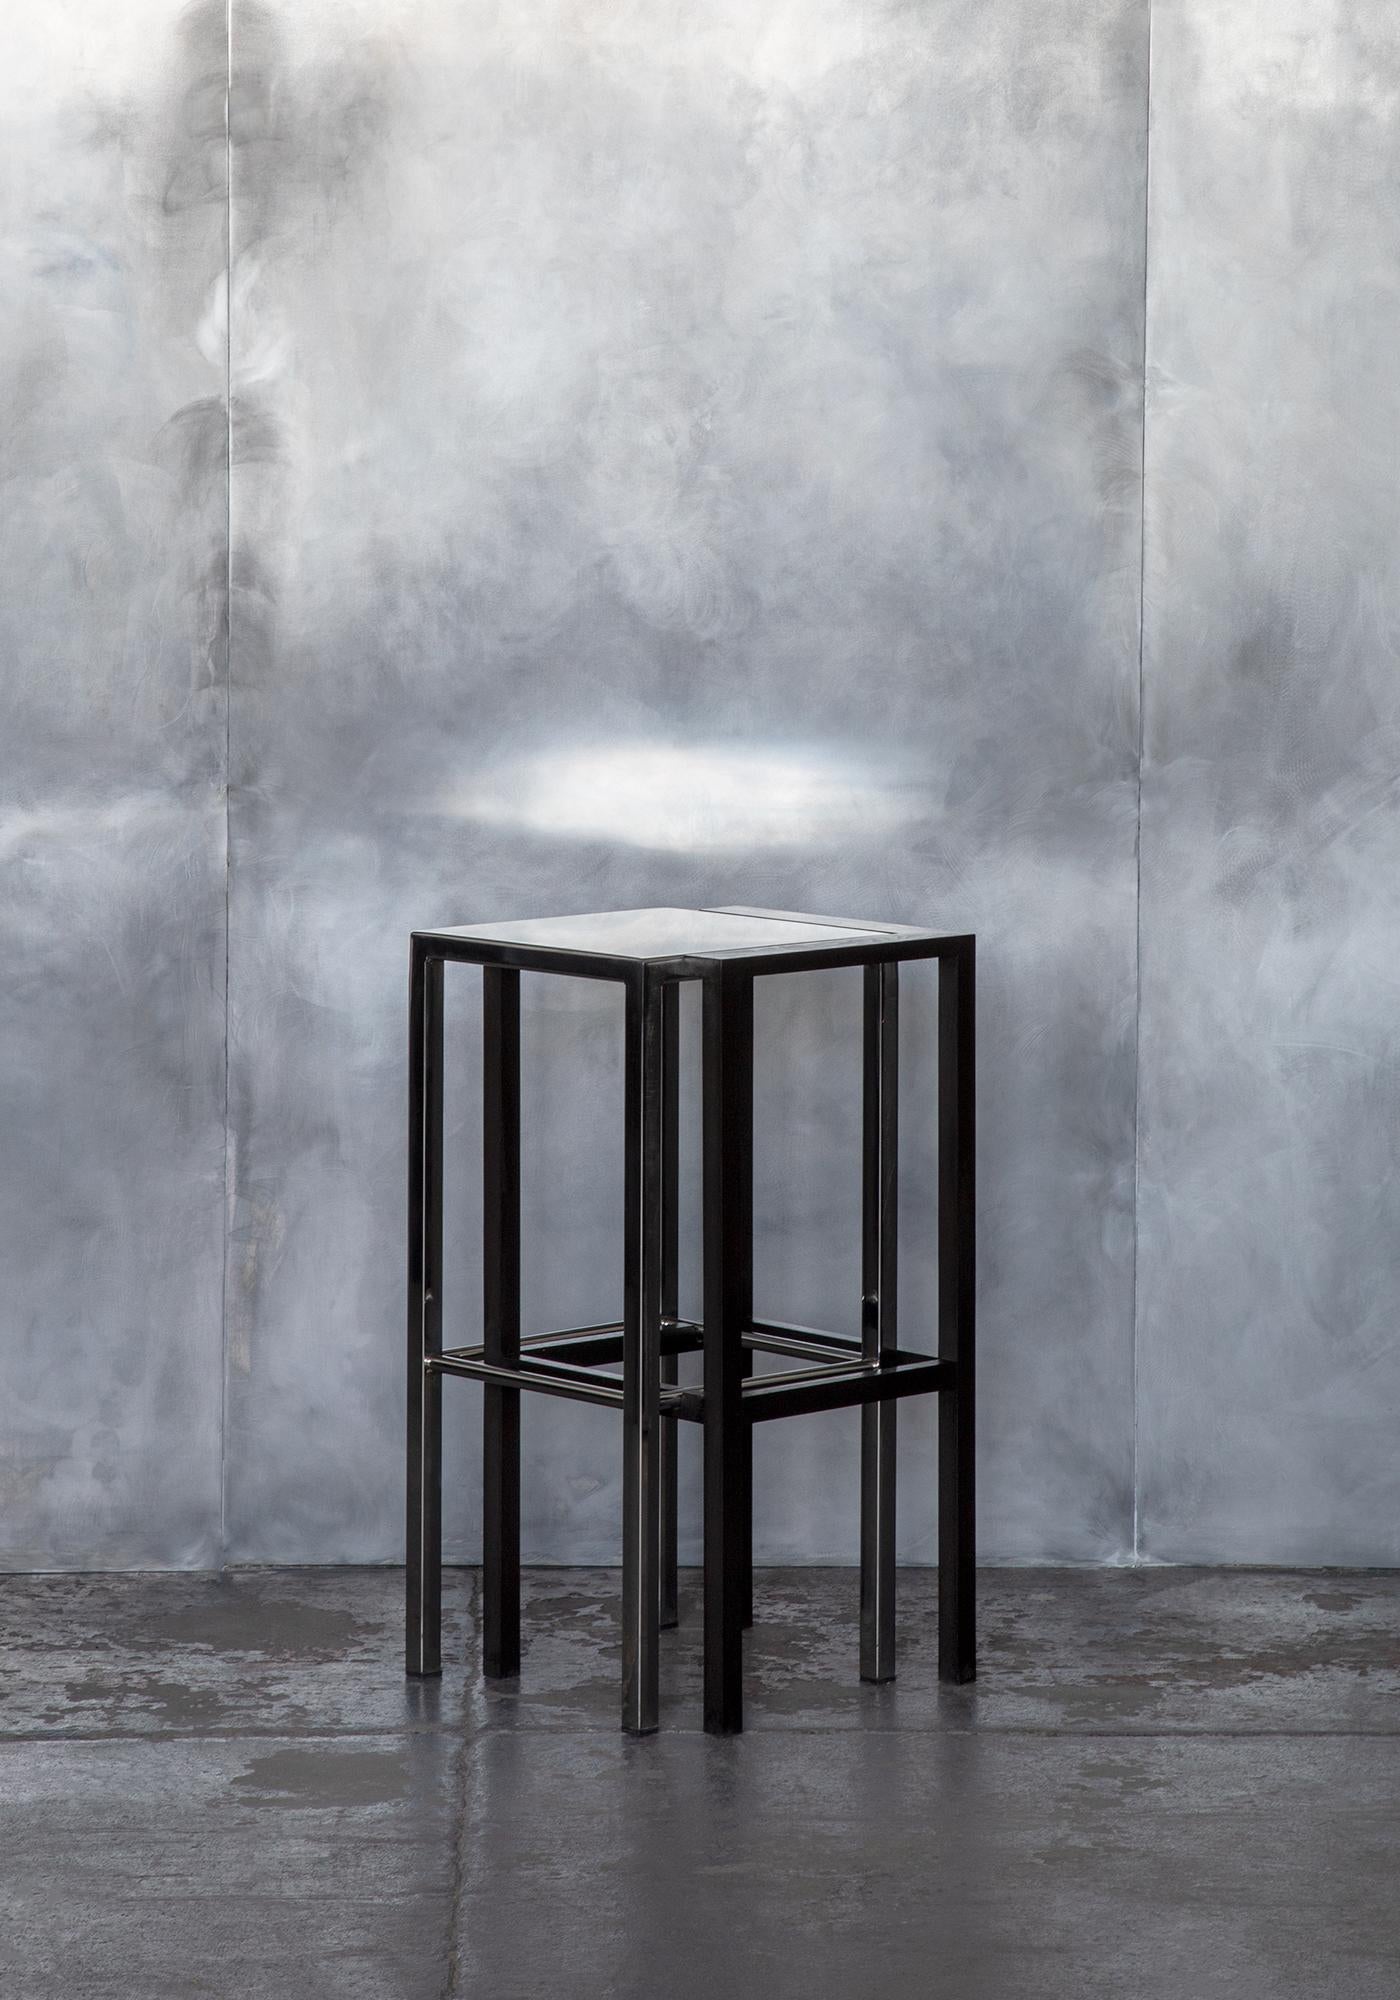 Inspired by a myriad of indulgent nights, this chair is meant to share the feeling and effect of “double vision,” the phenomenon of perceiving two images, usually overlapping, as one holistic object. Double vision is often the result of impaired